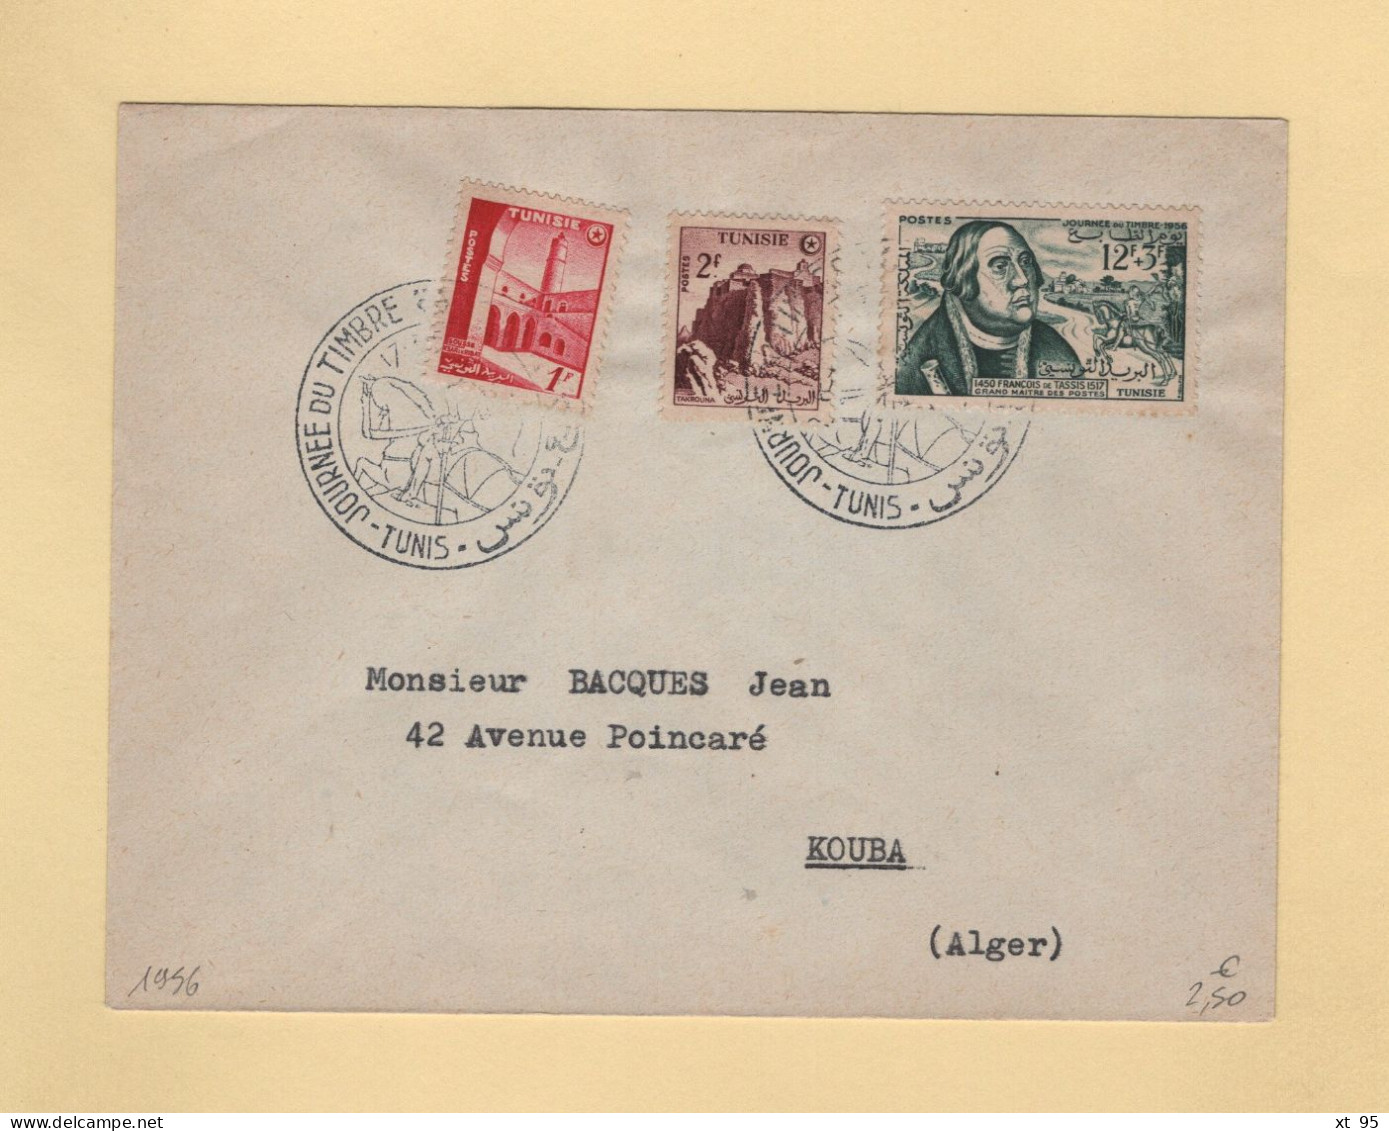 Tunisie - Journee Du Timbre - 1956 - Covers & Documents